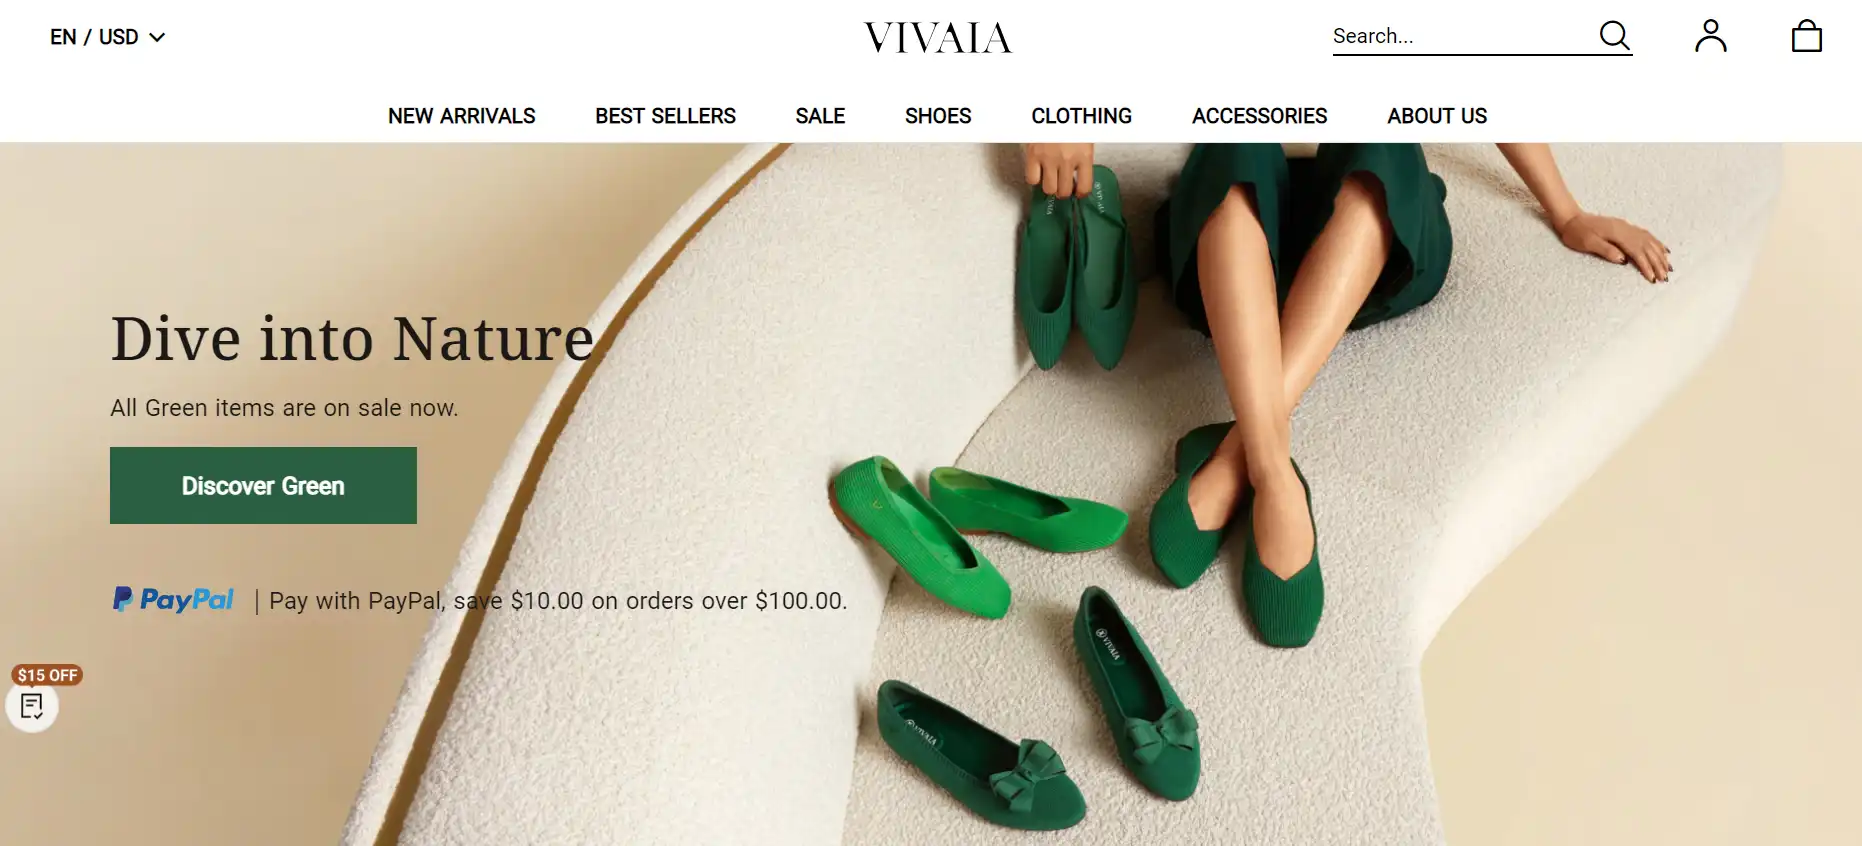 You are currently viewing The Complete Vivaia Shoes Review: Everything You Need to Know